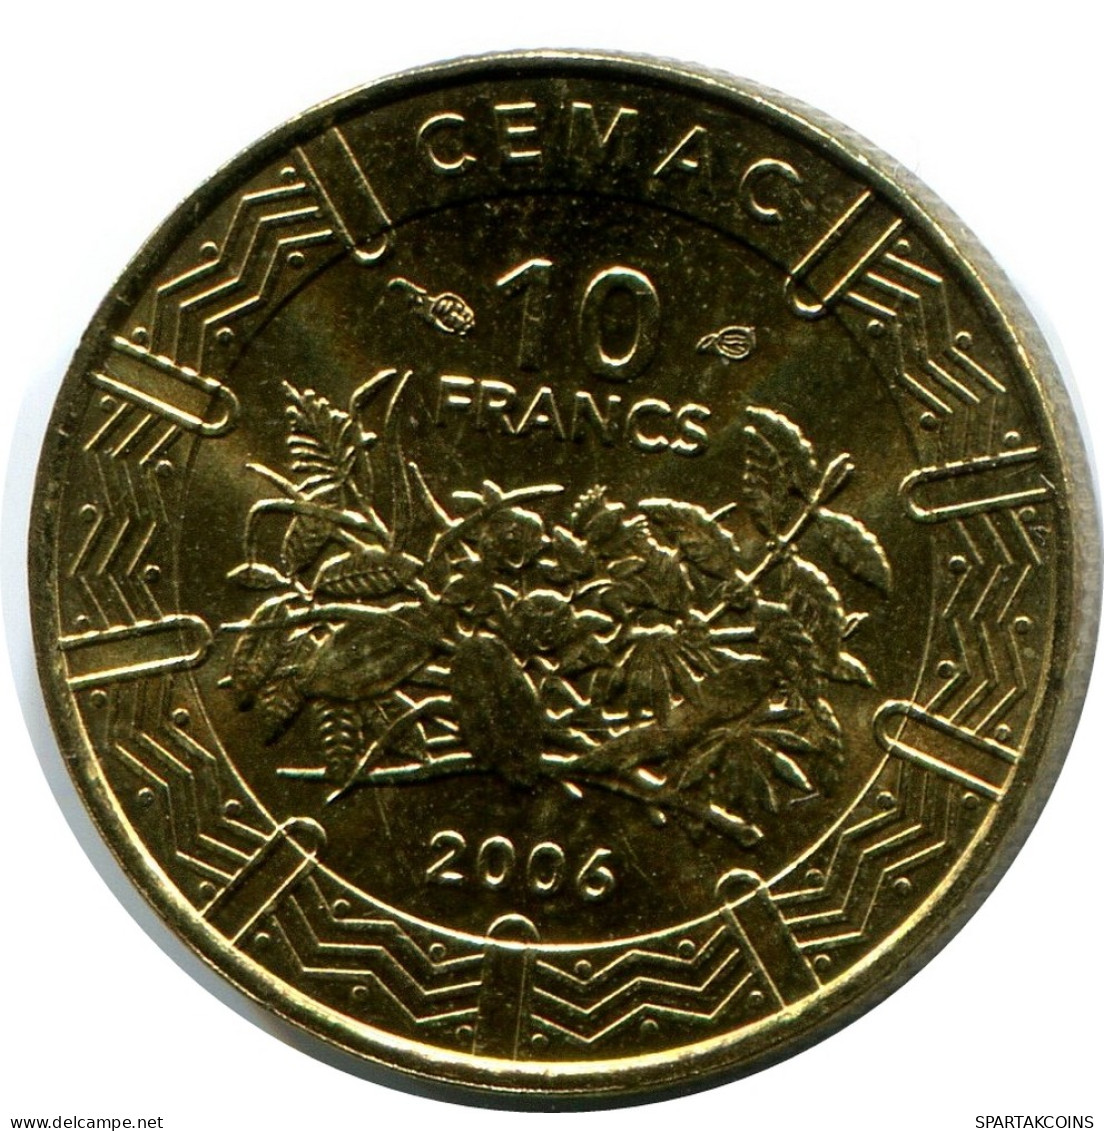 10 FRANCS CFA 2006 CENTRAL AFRICAN STATES (BEAC) Coin #AP862.U - Central African Republic